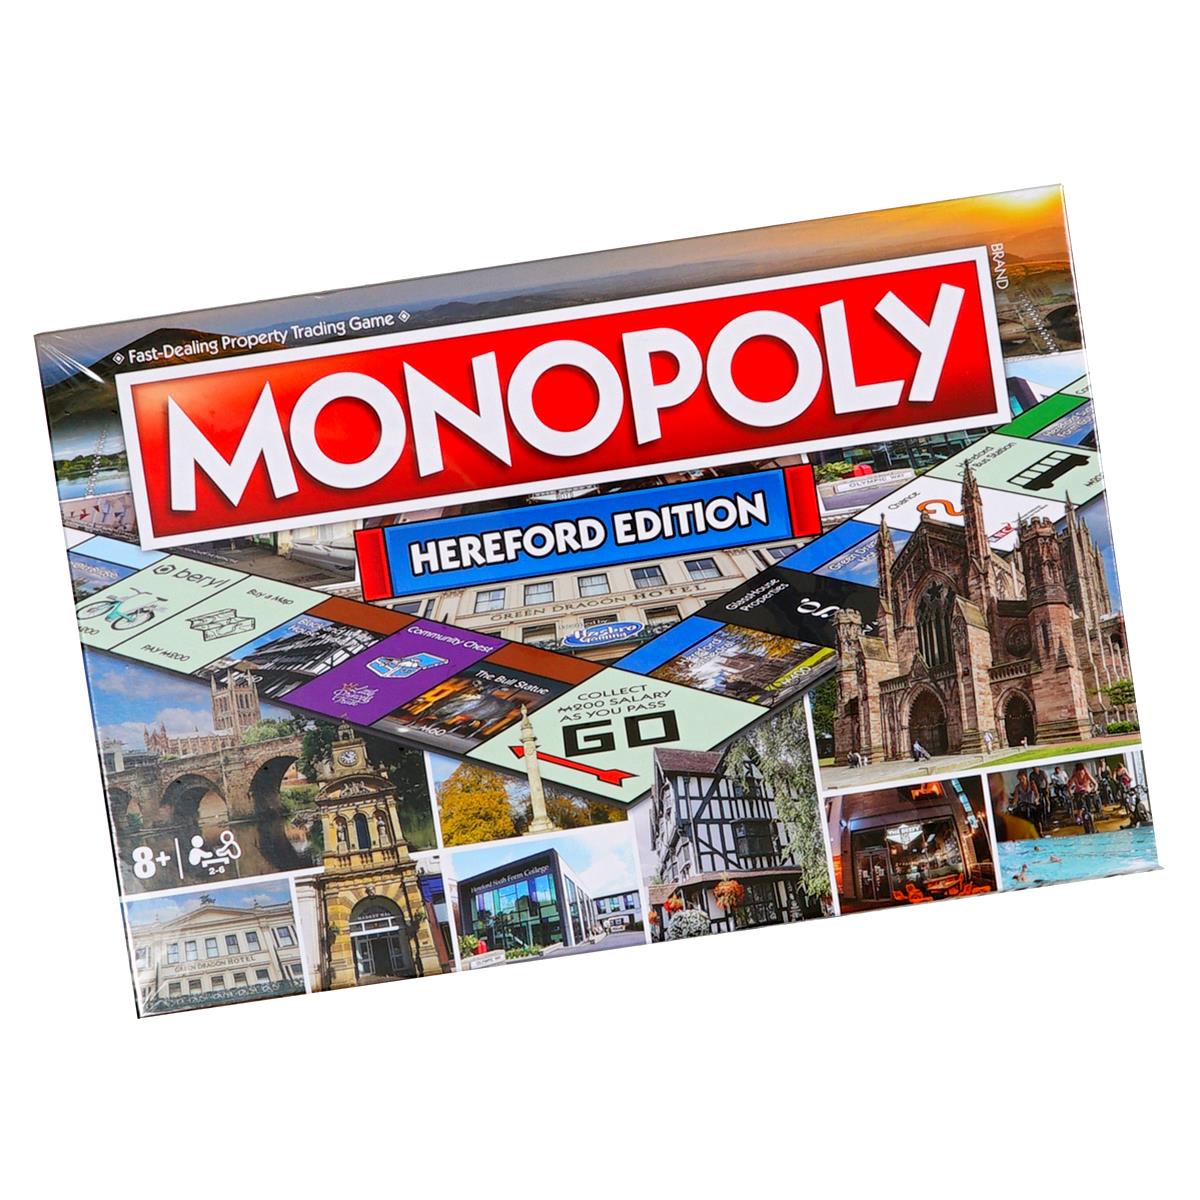 What is the trade name for the Hereford Monopoly board game?